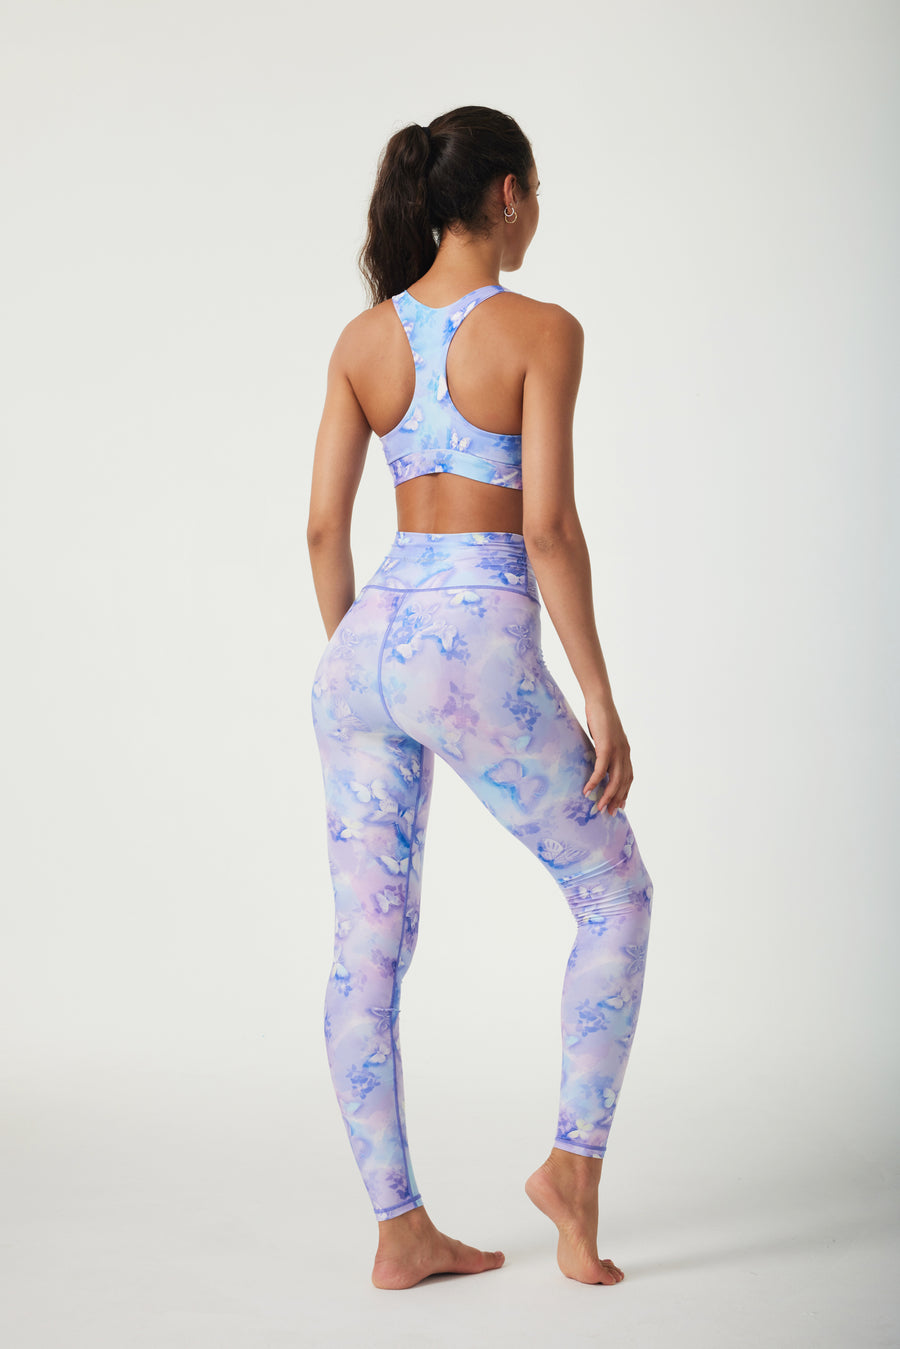 Butterfly Racerback Workout Outfit -SILVERWIND